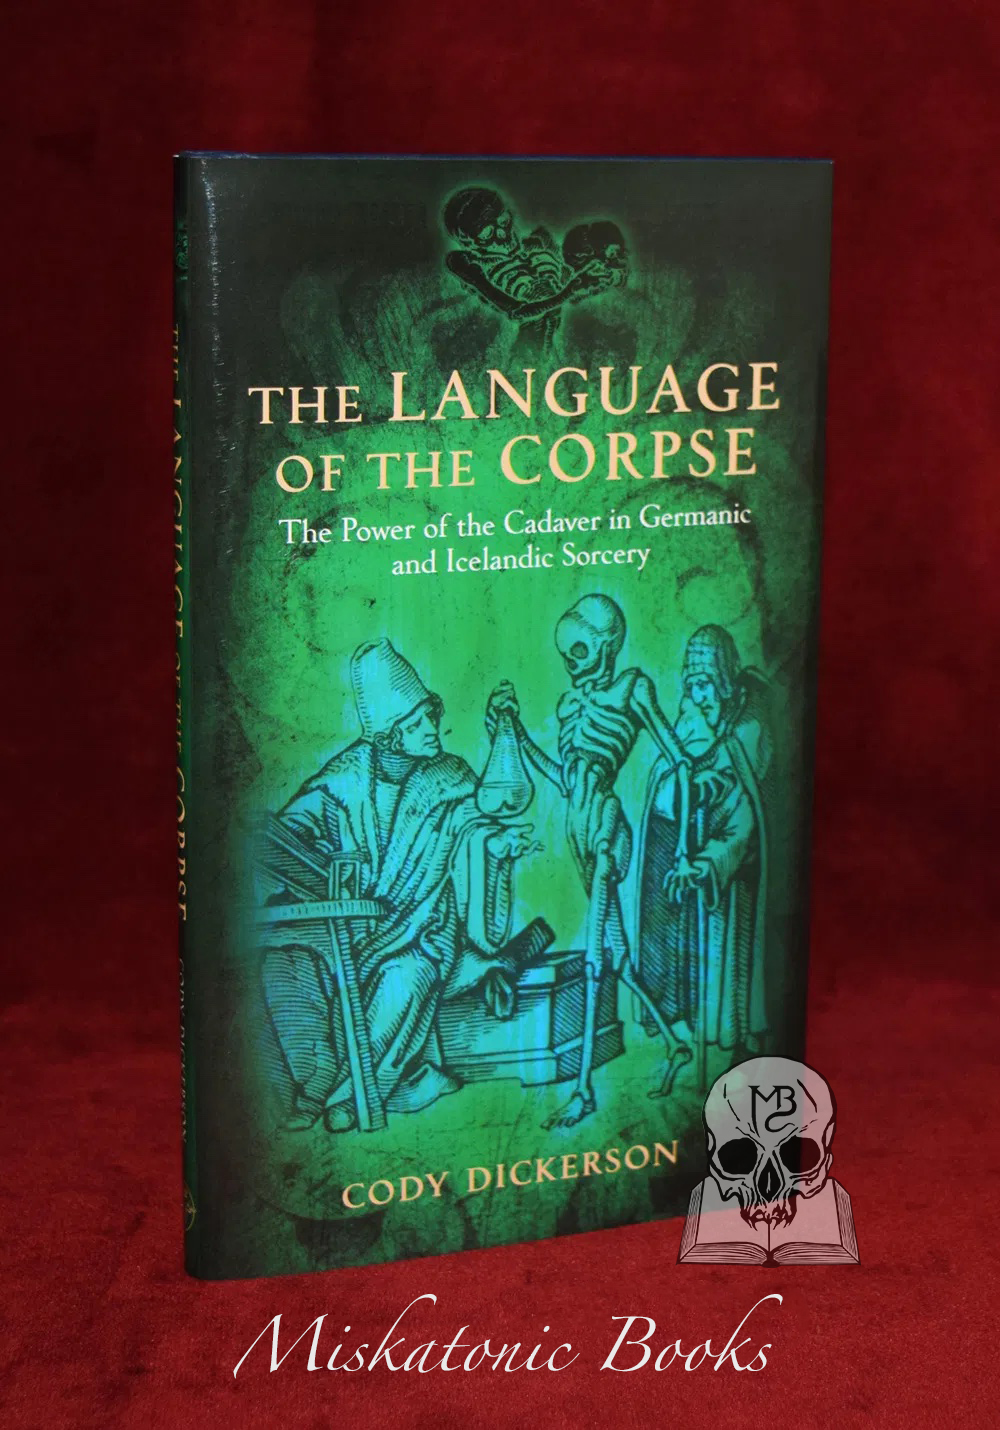 THE LANGUAGE OF THE CORPSE: The Power of the Cadaver in Germanic and Icelandic Sorcery by Cody Dickerson - Limited Edition Hardcover